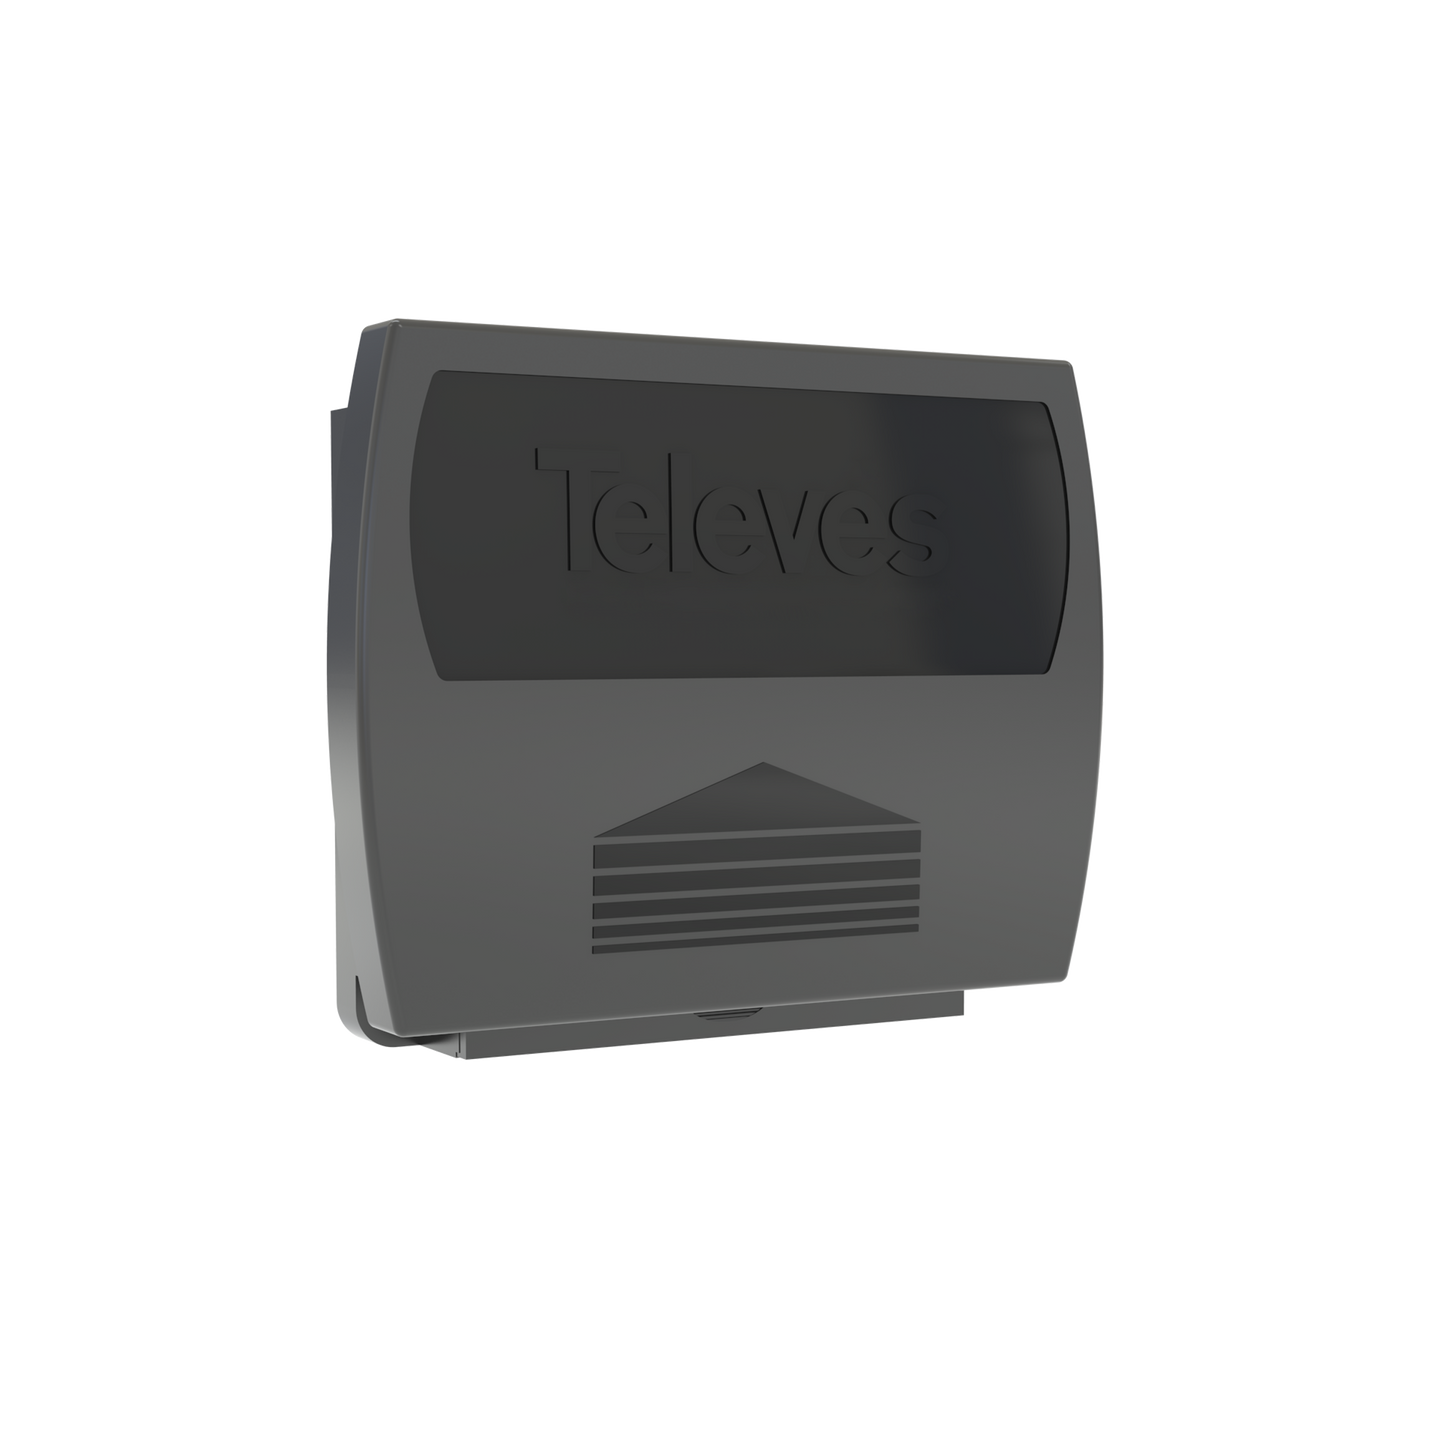 Televes 560383 Single Input Antenna Preamp, 5G Cell Filter, Coaxial F-fitting Connections, Automatic Gain Control (AGC)